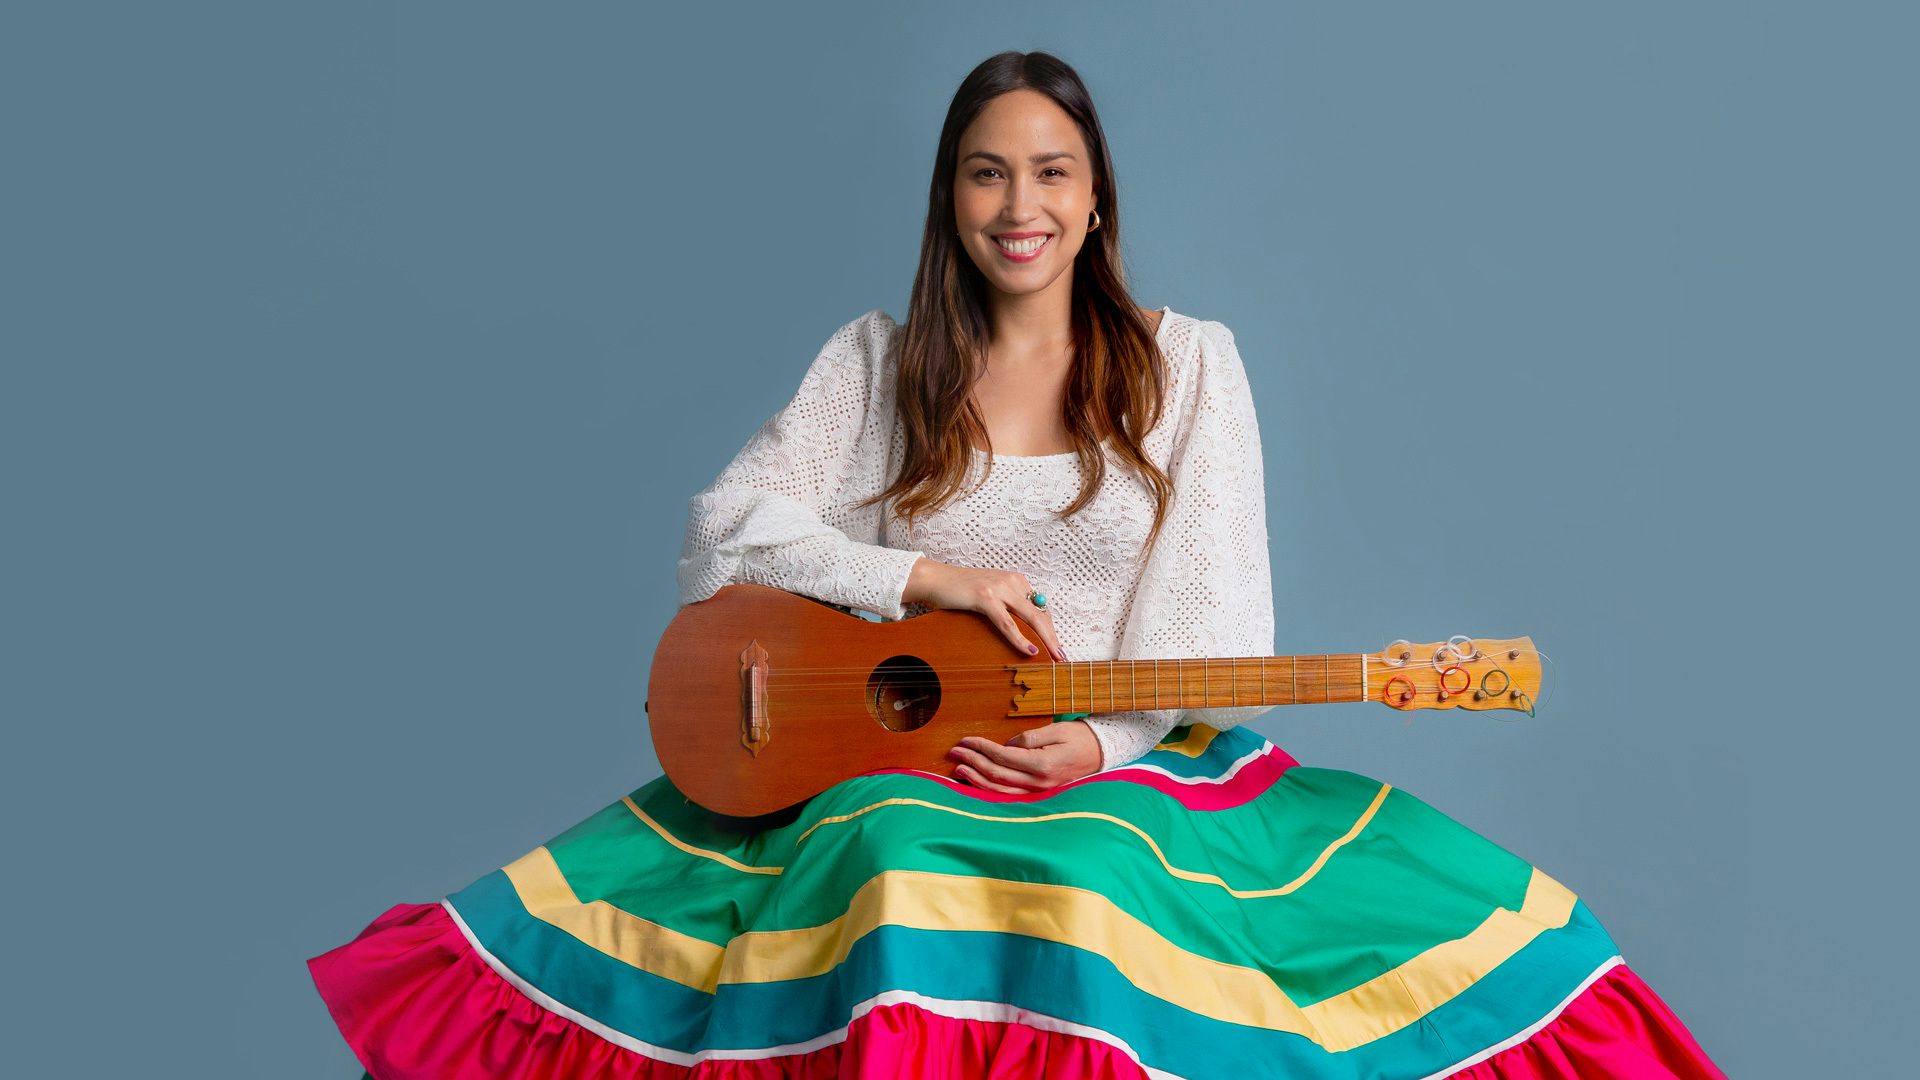 A woman in a colorful skirt smiles and sits against a blue background while holding a jarana—a string instrument resembling a guitar with Mexican origins.